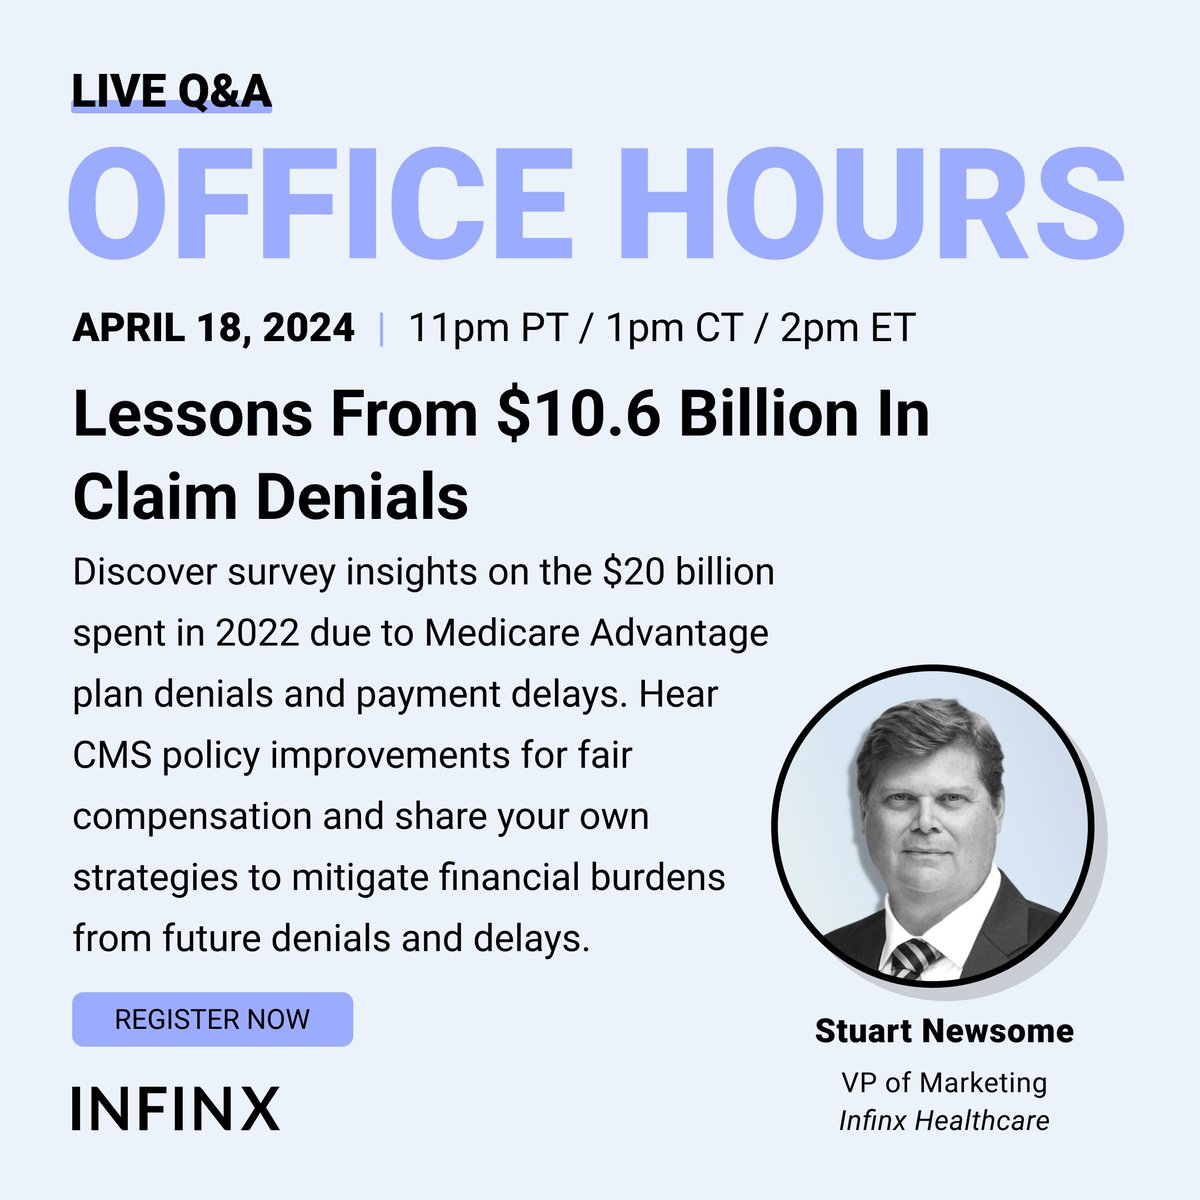 There’s still time to register for this week’s episode of Office Hours, “Lessons from $10.6 Billion in Claim Denials” with Stuart Newsome, our VP of Marketing. Register here for the Zoom link - hubs.li/Q02tlNMW0 #HealthcareTech #DenialsManagement #AI #RCMAutomation